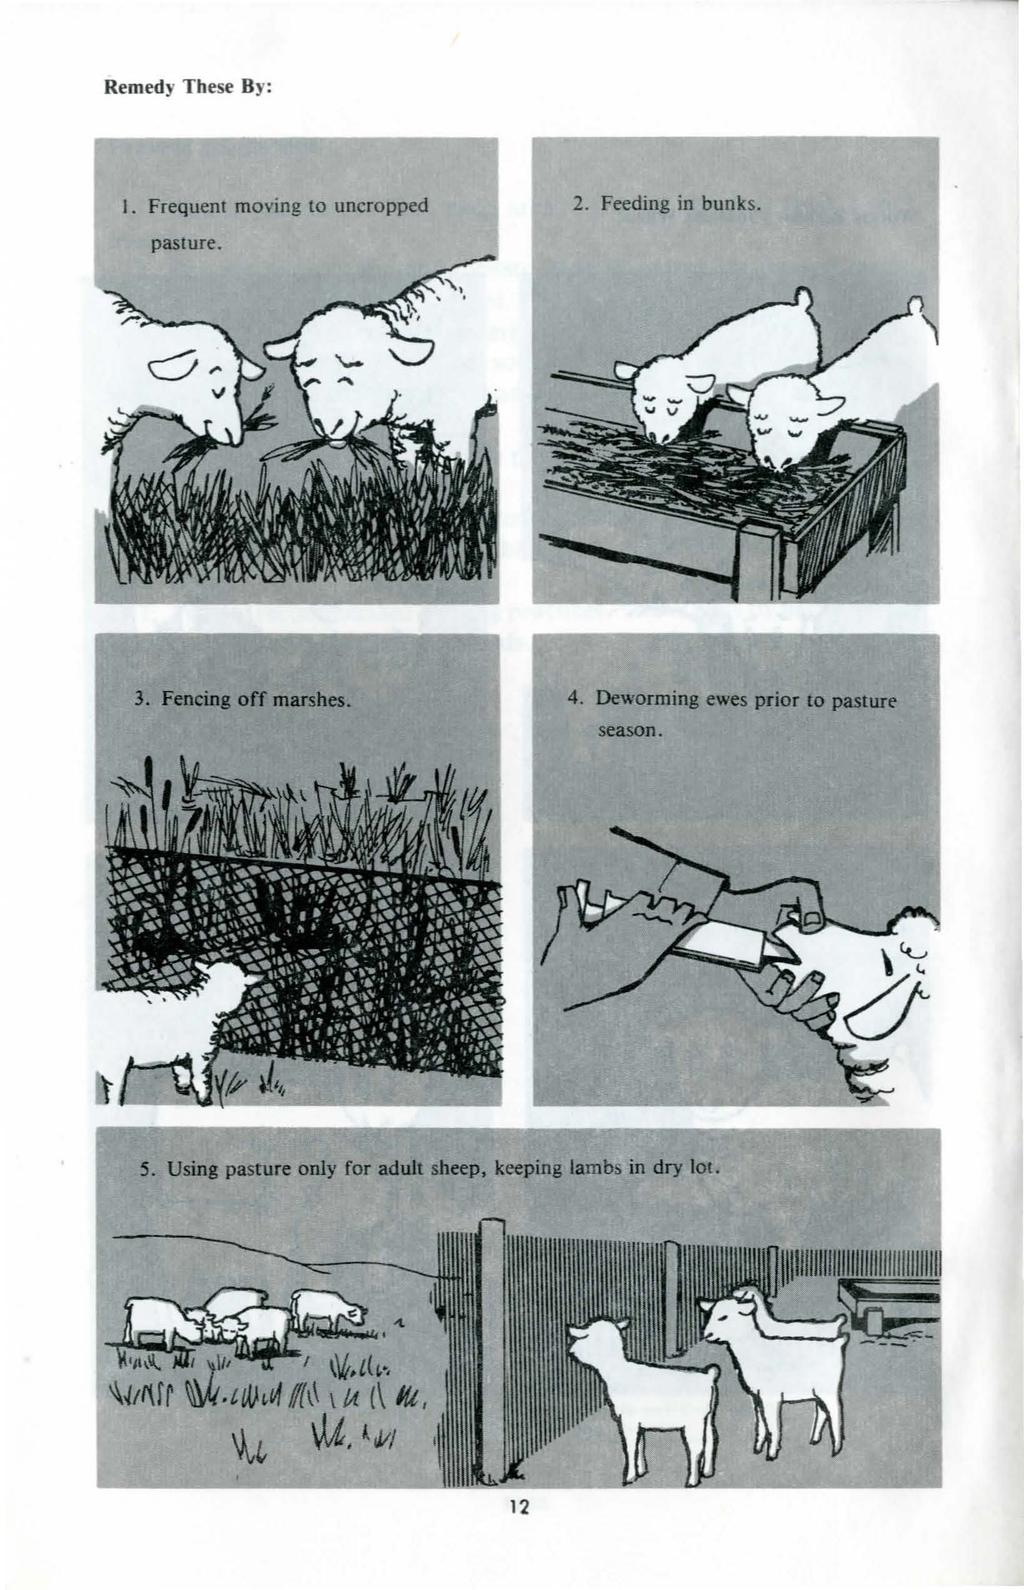 Rem edy T hese By: I. Frequent moving to uncropped 2. Feeding in bunks. 3. Fencing off marshes. 4.